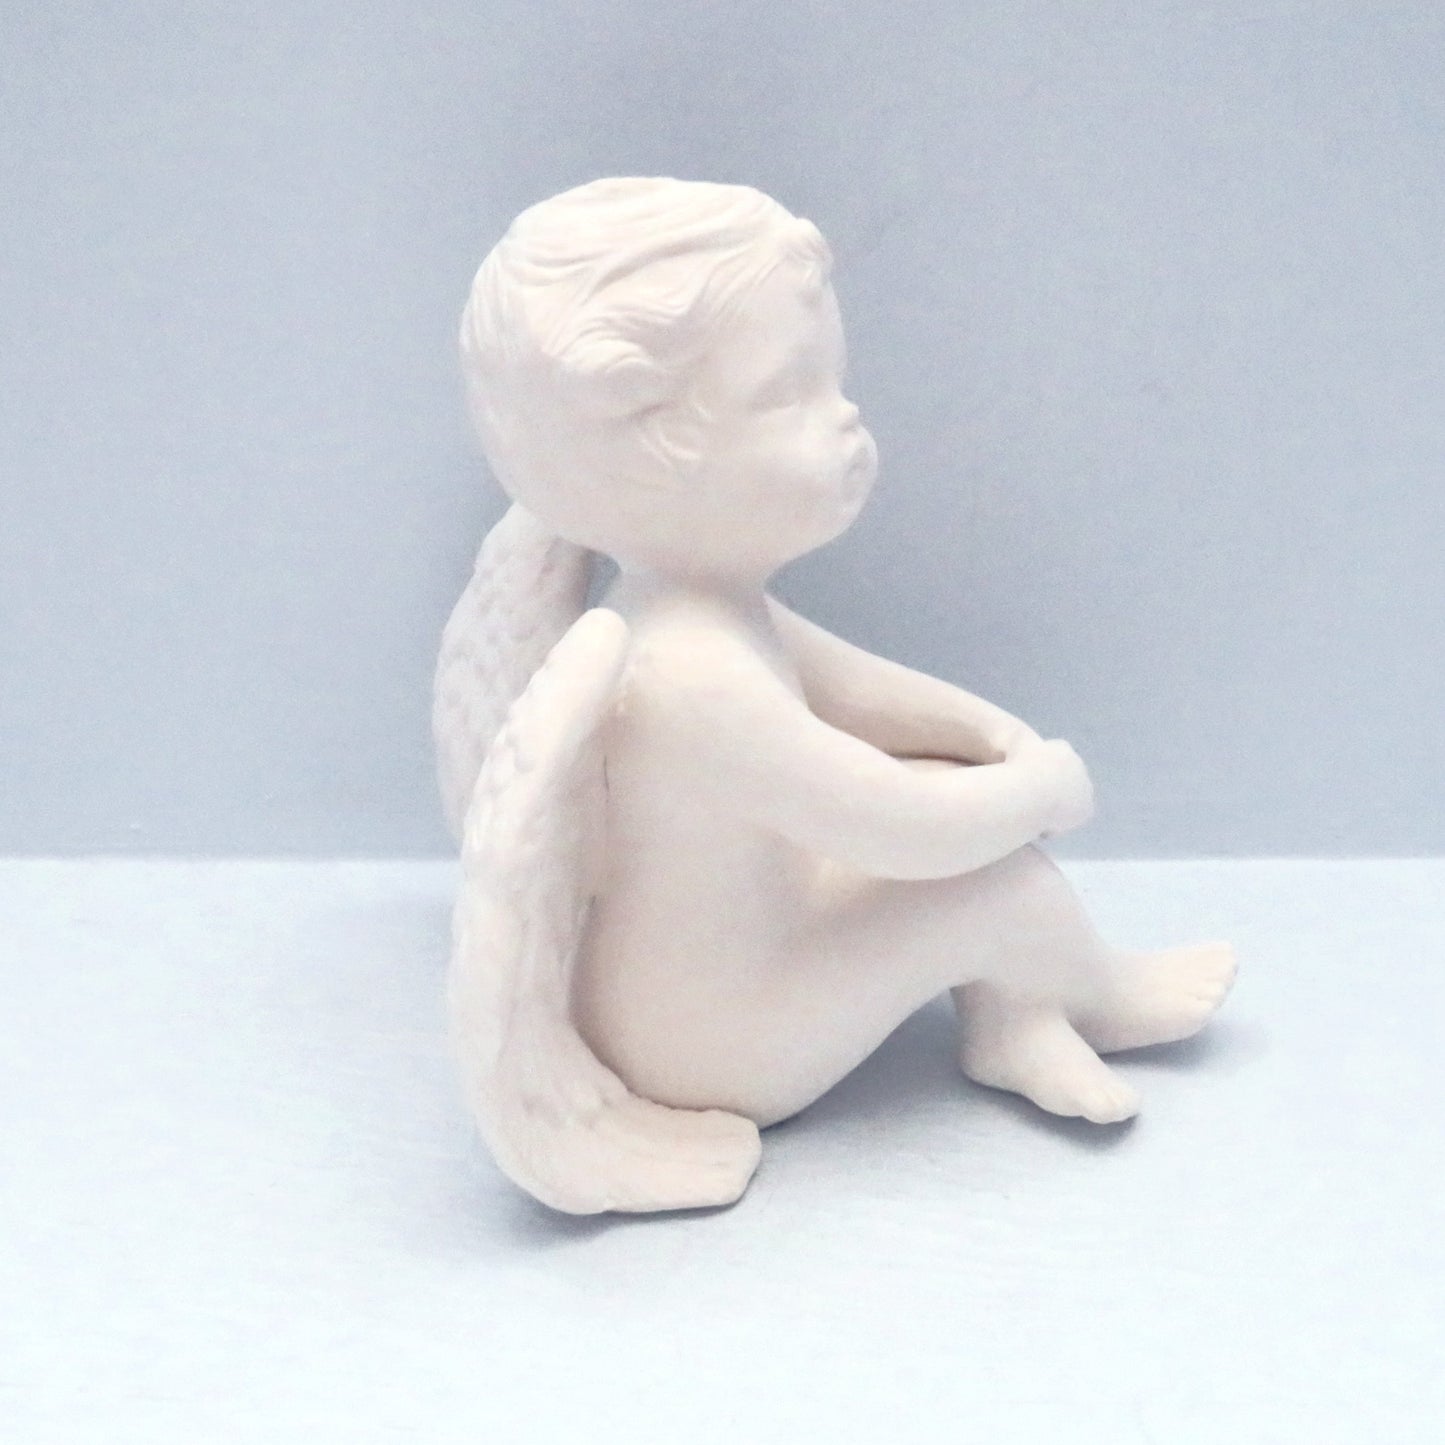 Side view of paintable ceramic cherub facing right.  His knees are bent and his legs are crossed at the ankles.  His elbows are bent, hands clasped and resting on his knees.  This angel statue is sitting on a pale blue table with pale blue background.